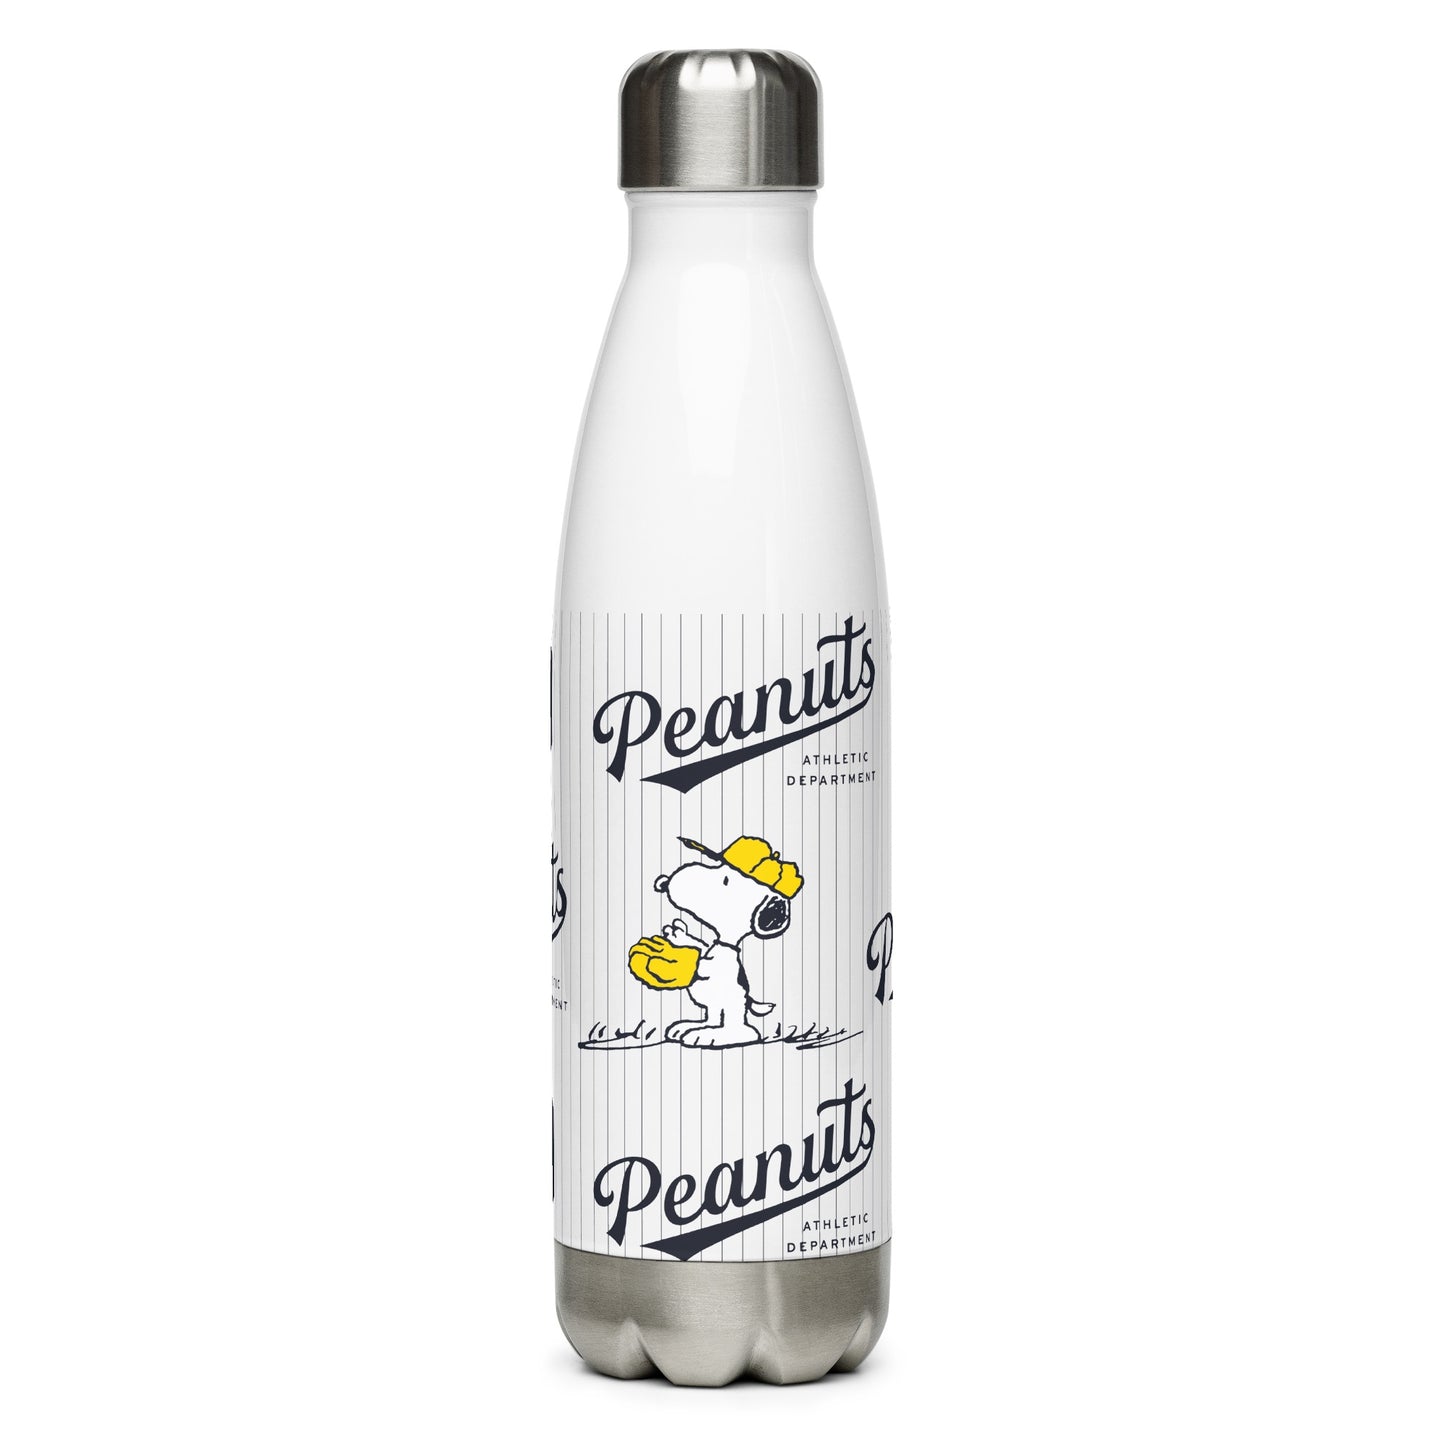 Peanuts Athletic Department Snoopy Water Bottle